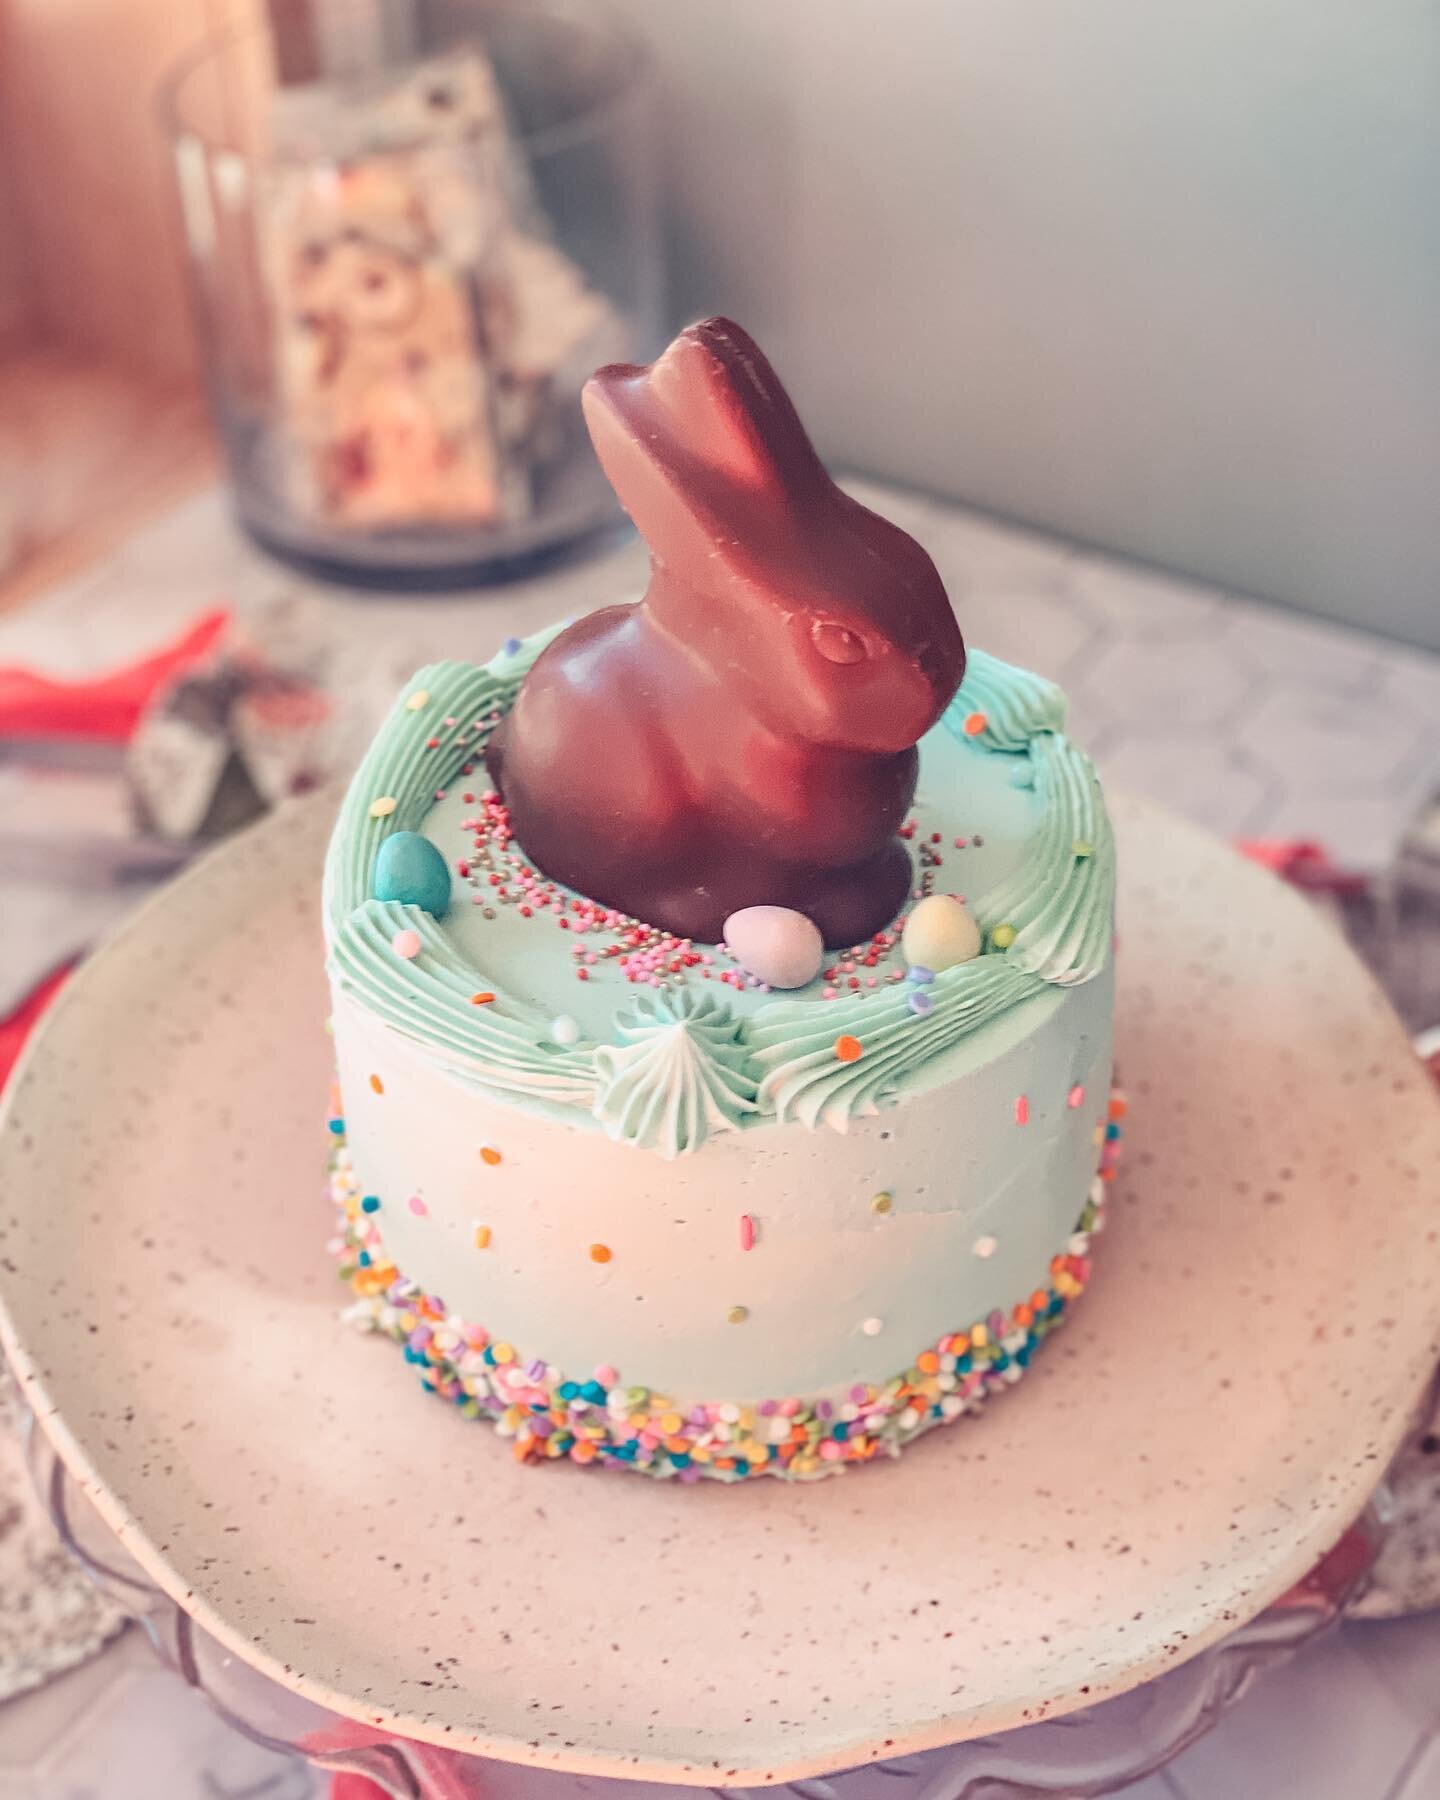 Our Easter Offerings are now available for pre-order on our website! This year we&rsquo;ve got this adorable Vanilla Chocolate Swirl Cake with a Lindt Chocolate Bunny, Carrot Cake with Cheesecake Centre and our Easter Cookie Box. 
🤍
And a reminder t